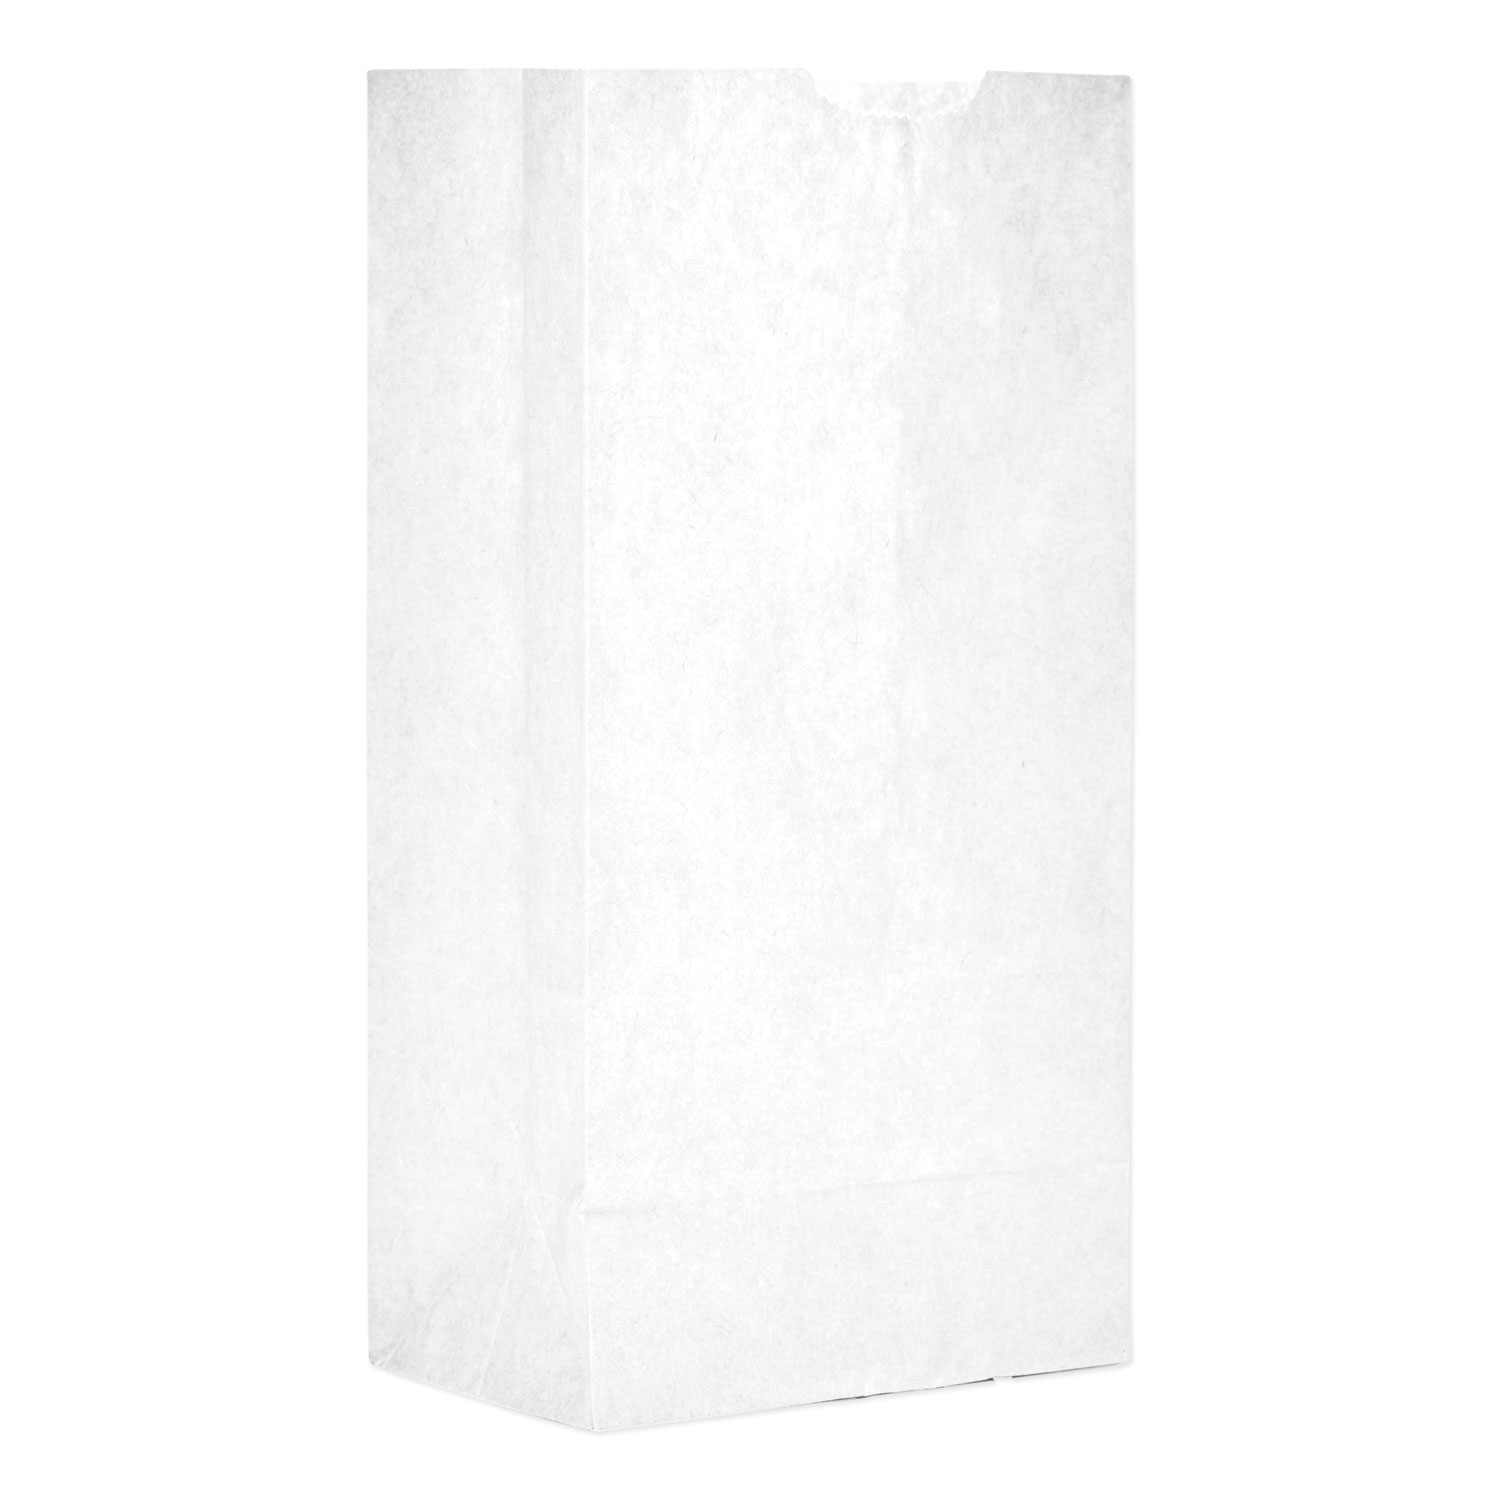  General WB04NP5C Grocery Paper Bags, 30 lbs Capacity, #4, 5w x 3.33d x 9.75h, White, 500 Bags (BAGGW4500) 